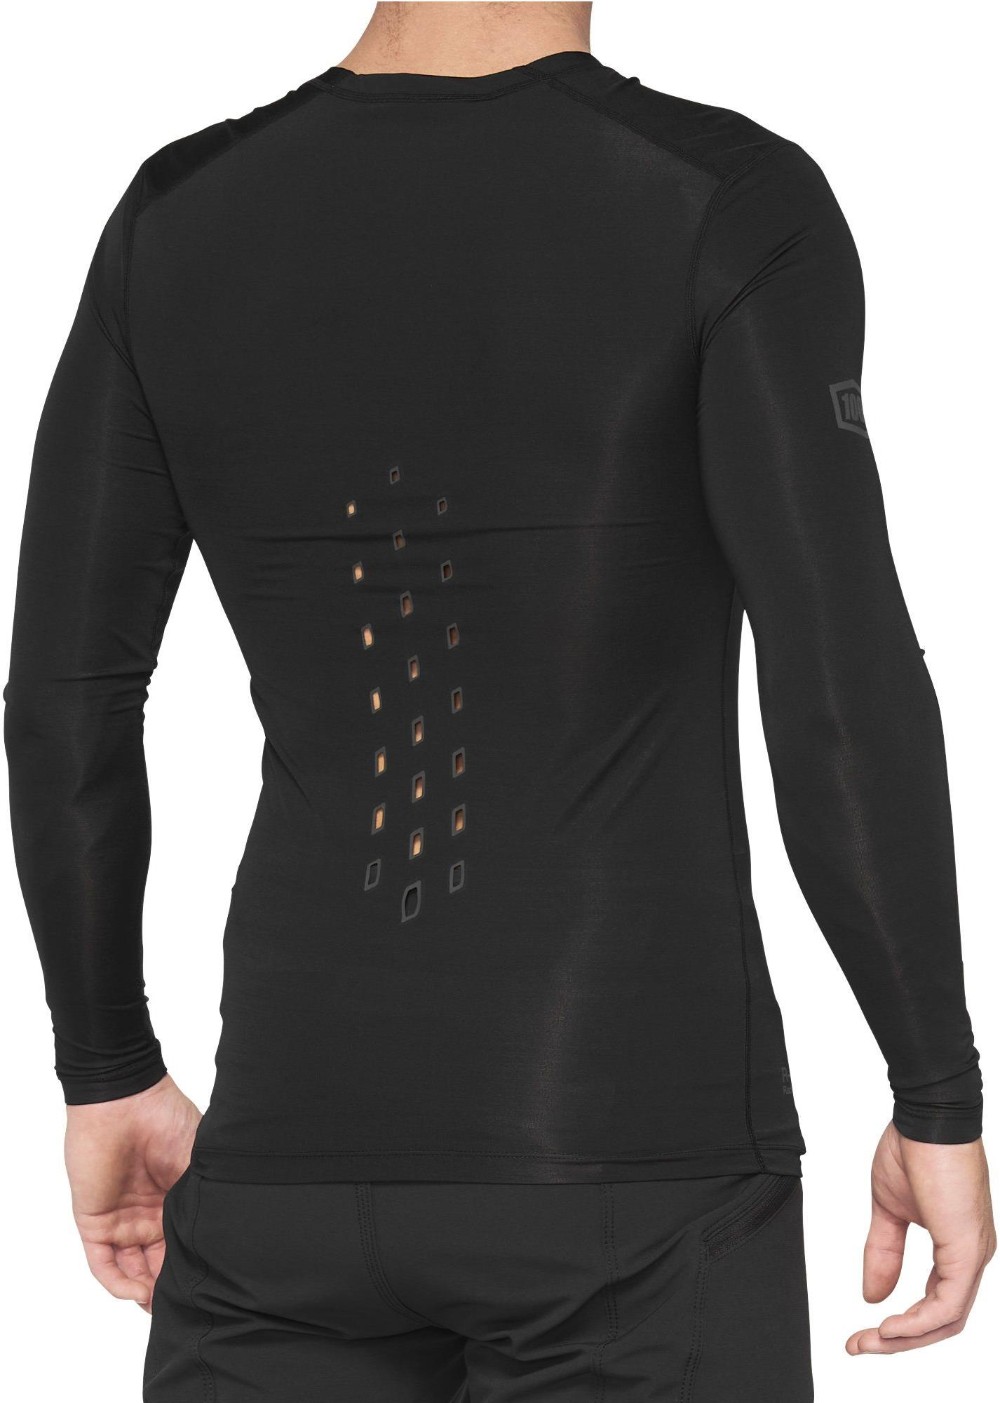 R-Core Concept Long Sleeve MTB Cycling Jersey image 1